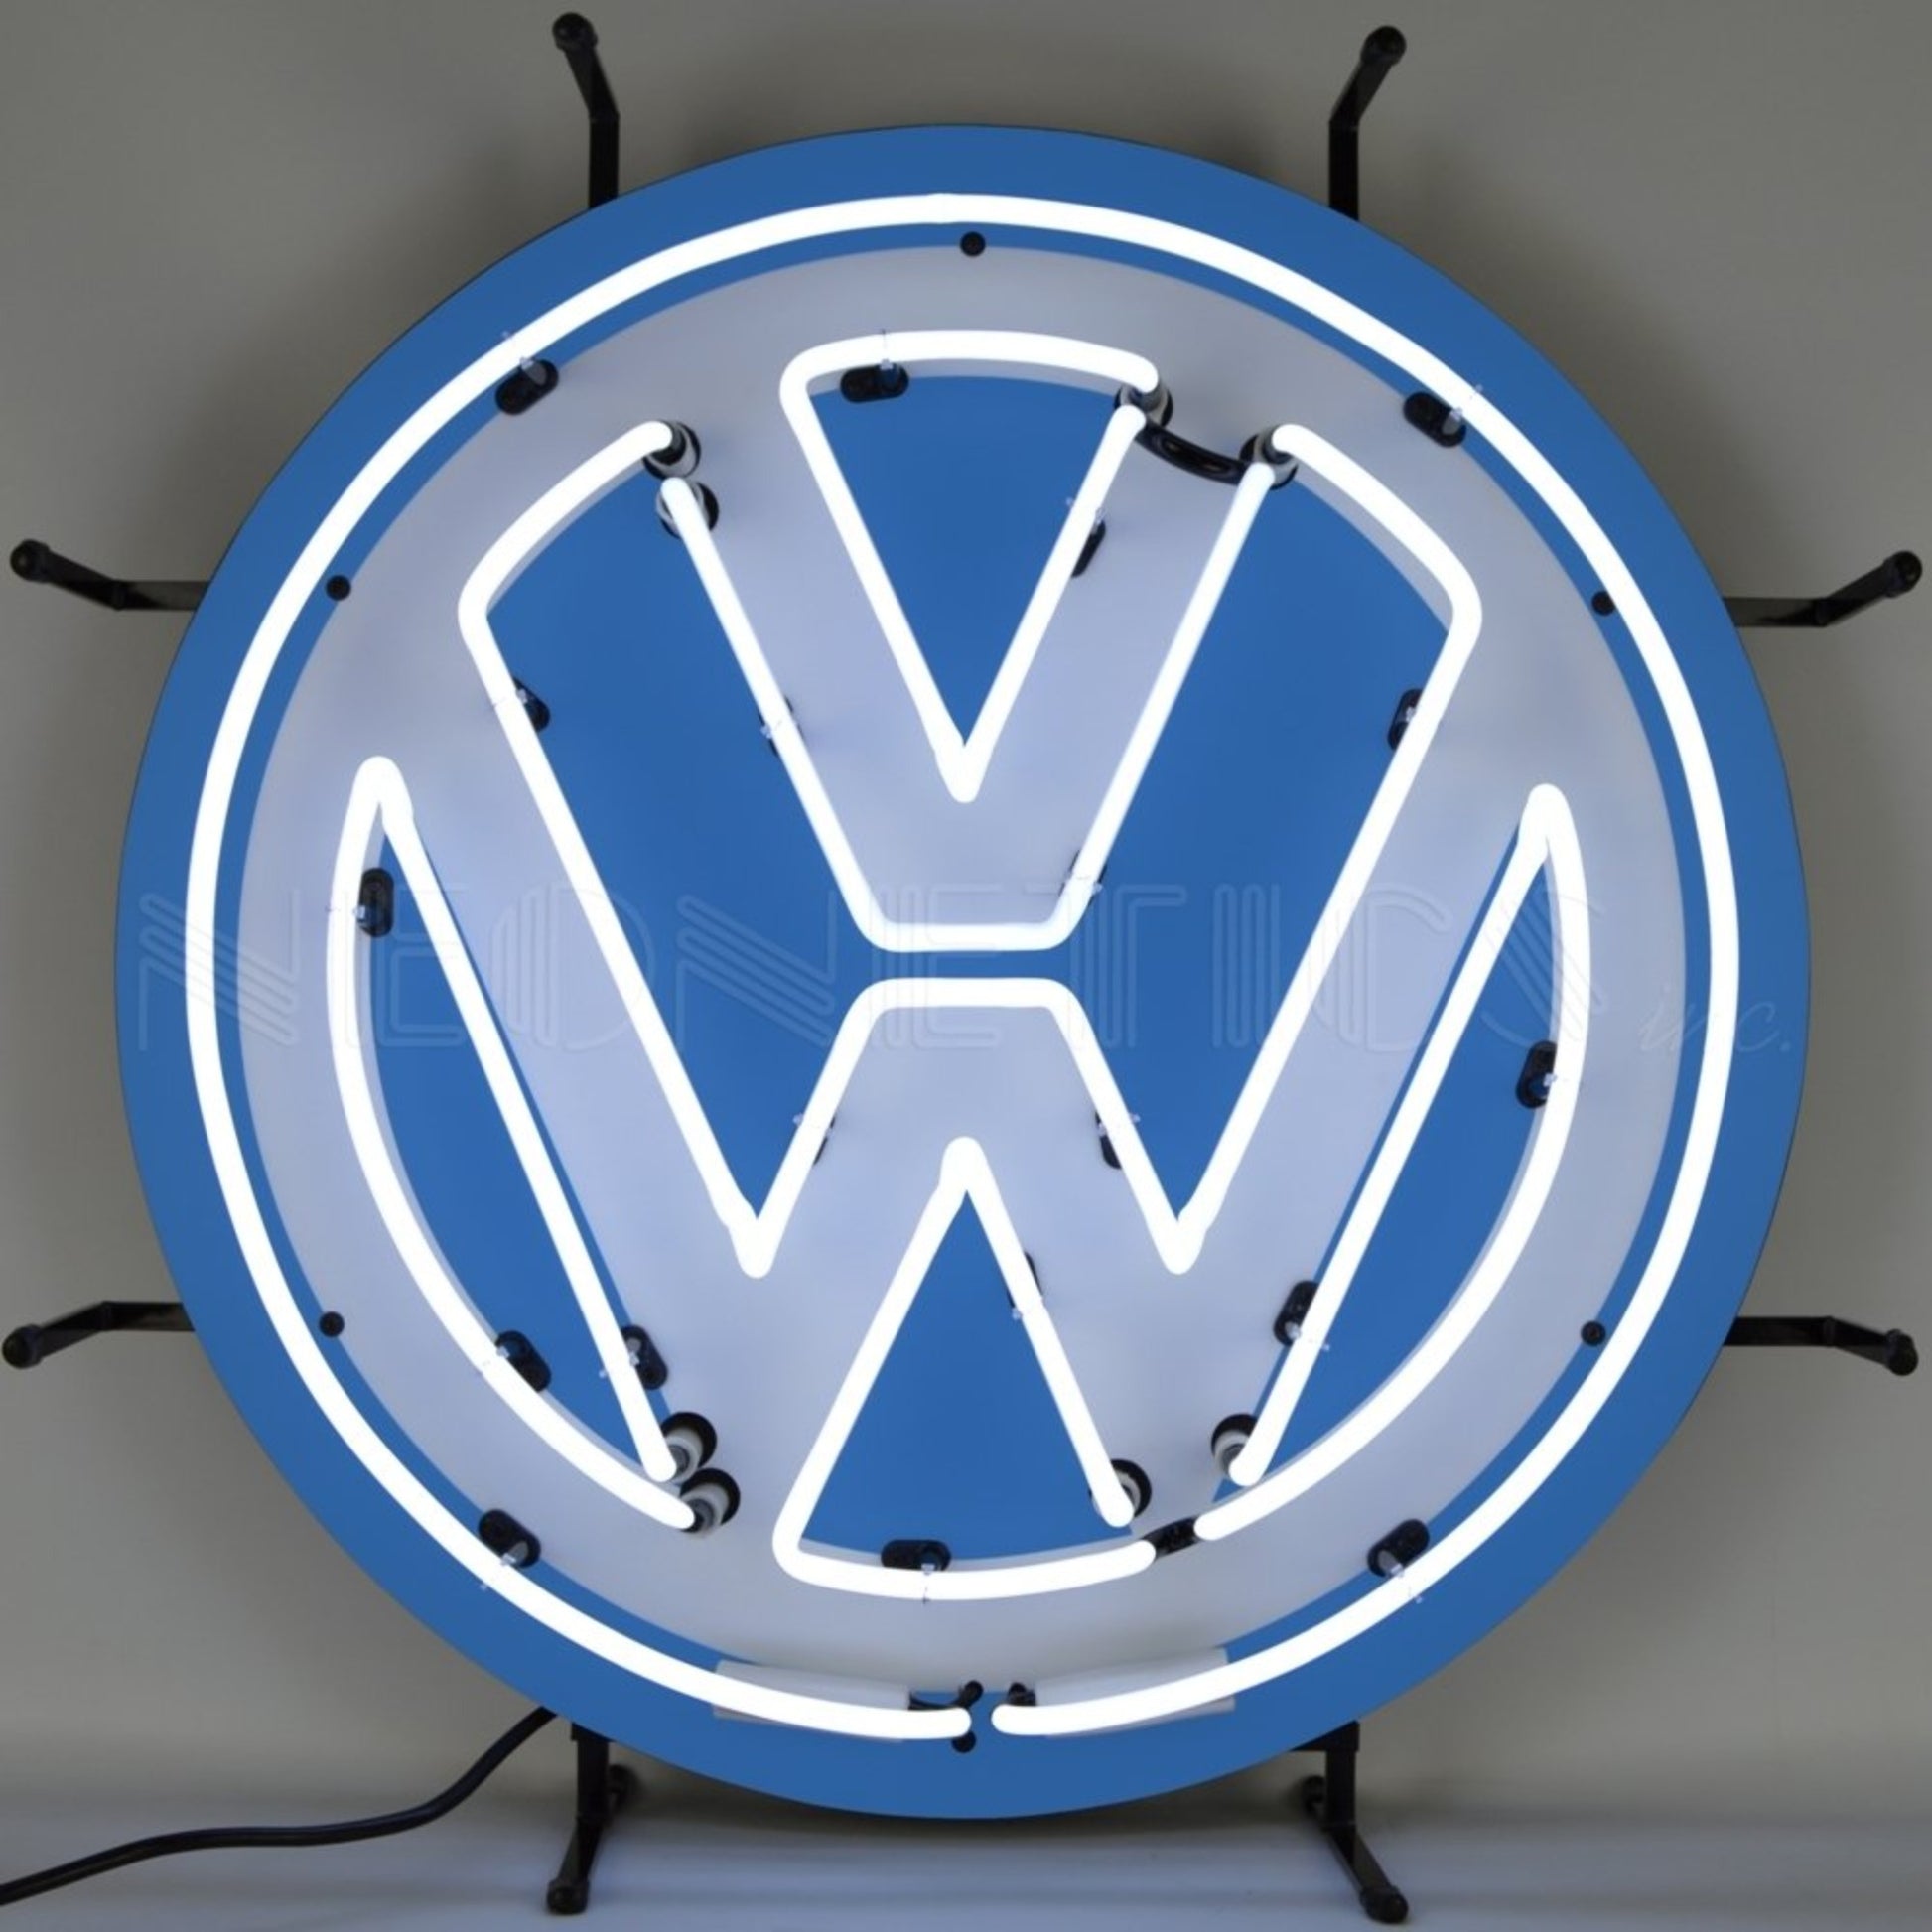 Classic Volkswagen VW logo in a round neon sign, emitting a brilliant blue and white glow to elevate any automotive enthusiast's decor.